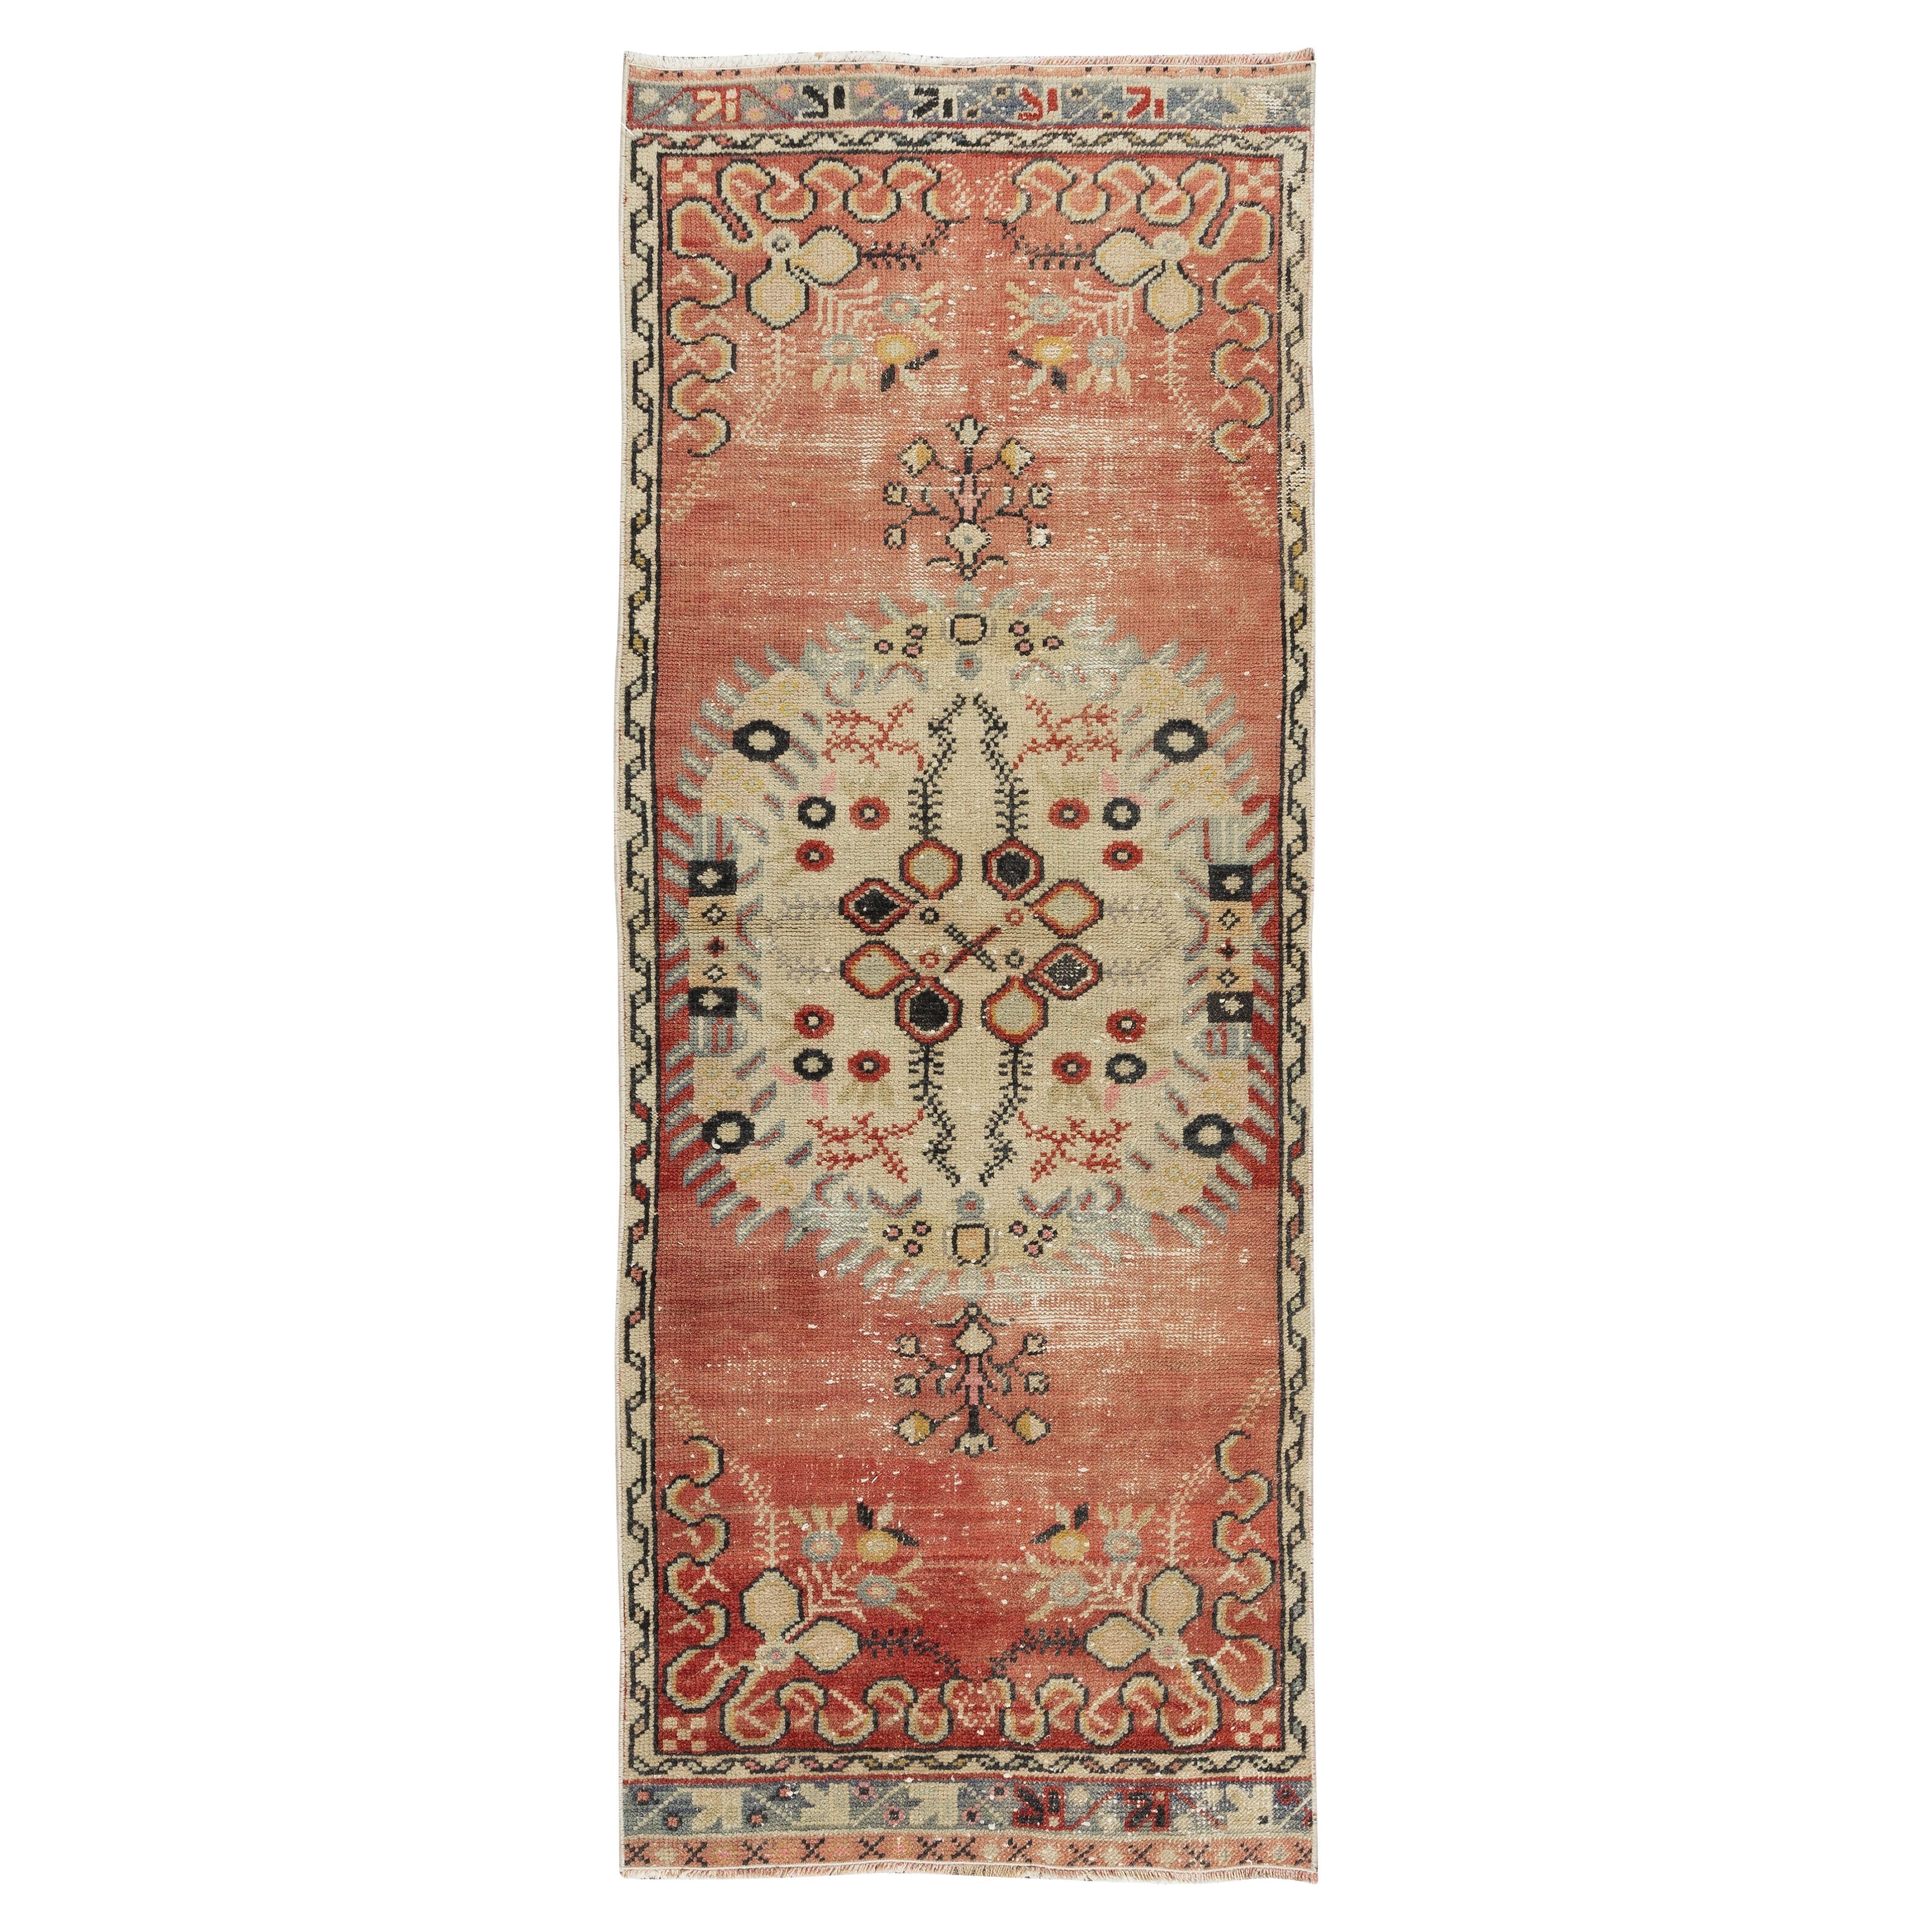 Vintage Turkish Rugs and Carpets - 15,895 For Sale at 1stdibs